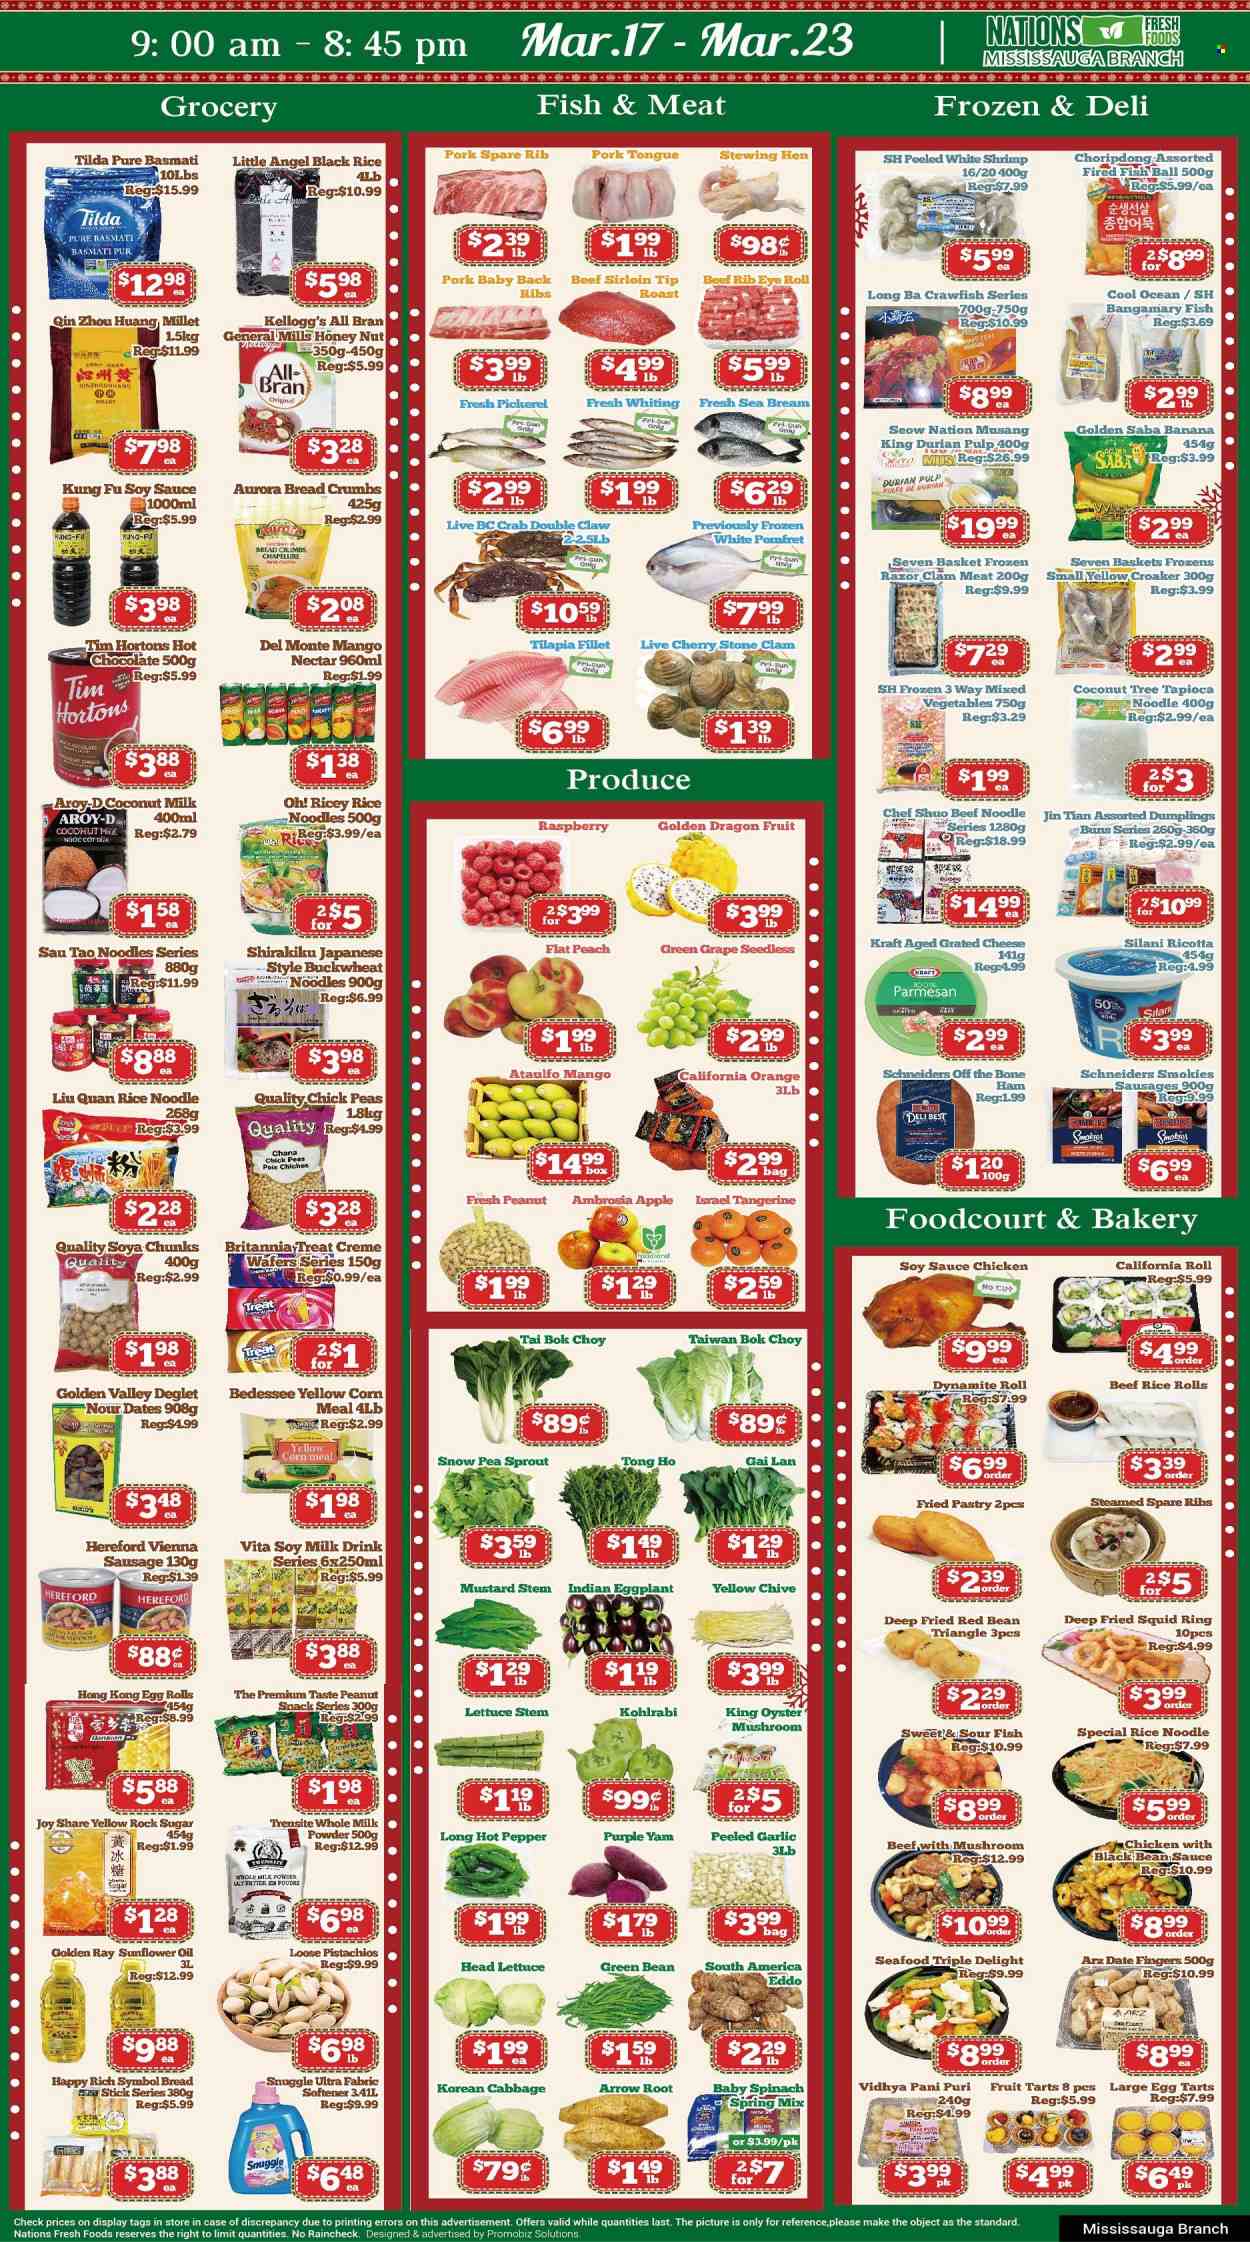 thumbnail - Nations Fresh Foods Flyer - March 17, 2023 - March 23, 2023 - Sales products - oyster mushrooms, buns, breadcrumbs, bok choy, cabbage, corn, garlic, spinach, peas, lettuce, eggplant, mango, cherries, oranges, dragon fruit, clams, squid, tilapia, oysters, seafood, crab, seabream, shrimps, whiting, squid rings, walleye, sauce, egg rolls, dumplings, noodles, Kraft®, roast, ham, ham off the bone, sausage, vienna sausage, parmesan, grated cheese, soy milk, milk powder, mixed vegetables, crawfish, wafers, snack, Kellogg's, peanut snack, coconut milk, Del Monte, All-Bran, basmati rice, buckwheat, soya chunks, rice vermicelli, pepper, mustard, soy sauce, sunflower oil, oil, pistachios, hot chocolate, beef meat, beef sirloin, ribs, pork meat, pork ribs, pork spare ribs, pork back ribs, Snuggle, fabric softener, Joy, kohlrabi, ricotta. Page 1.